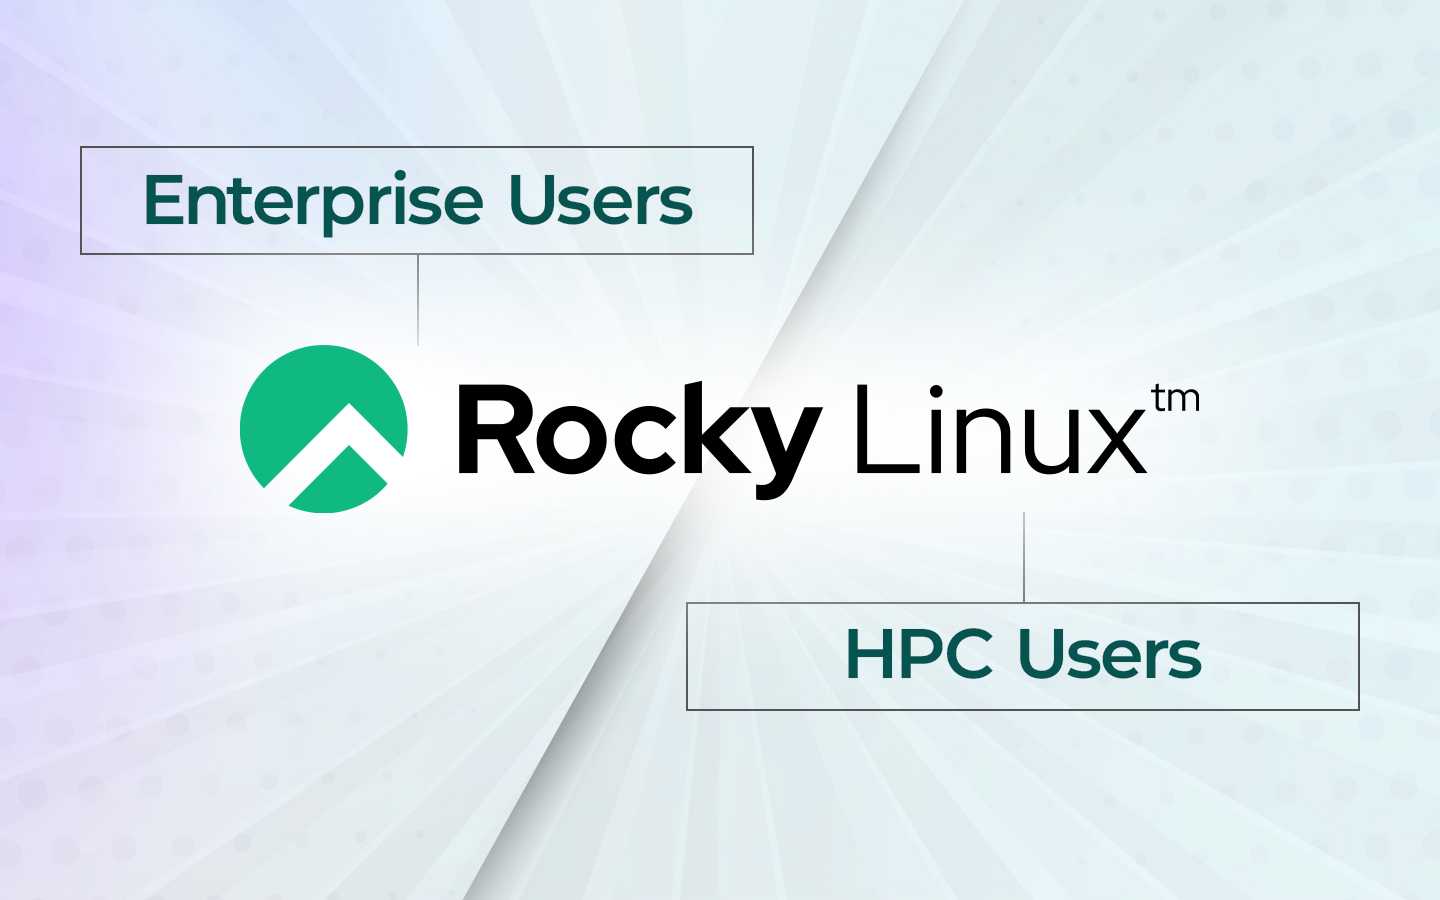 Rocky Linux: Unmatched Stability for Both Enterprise and HPC Users